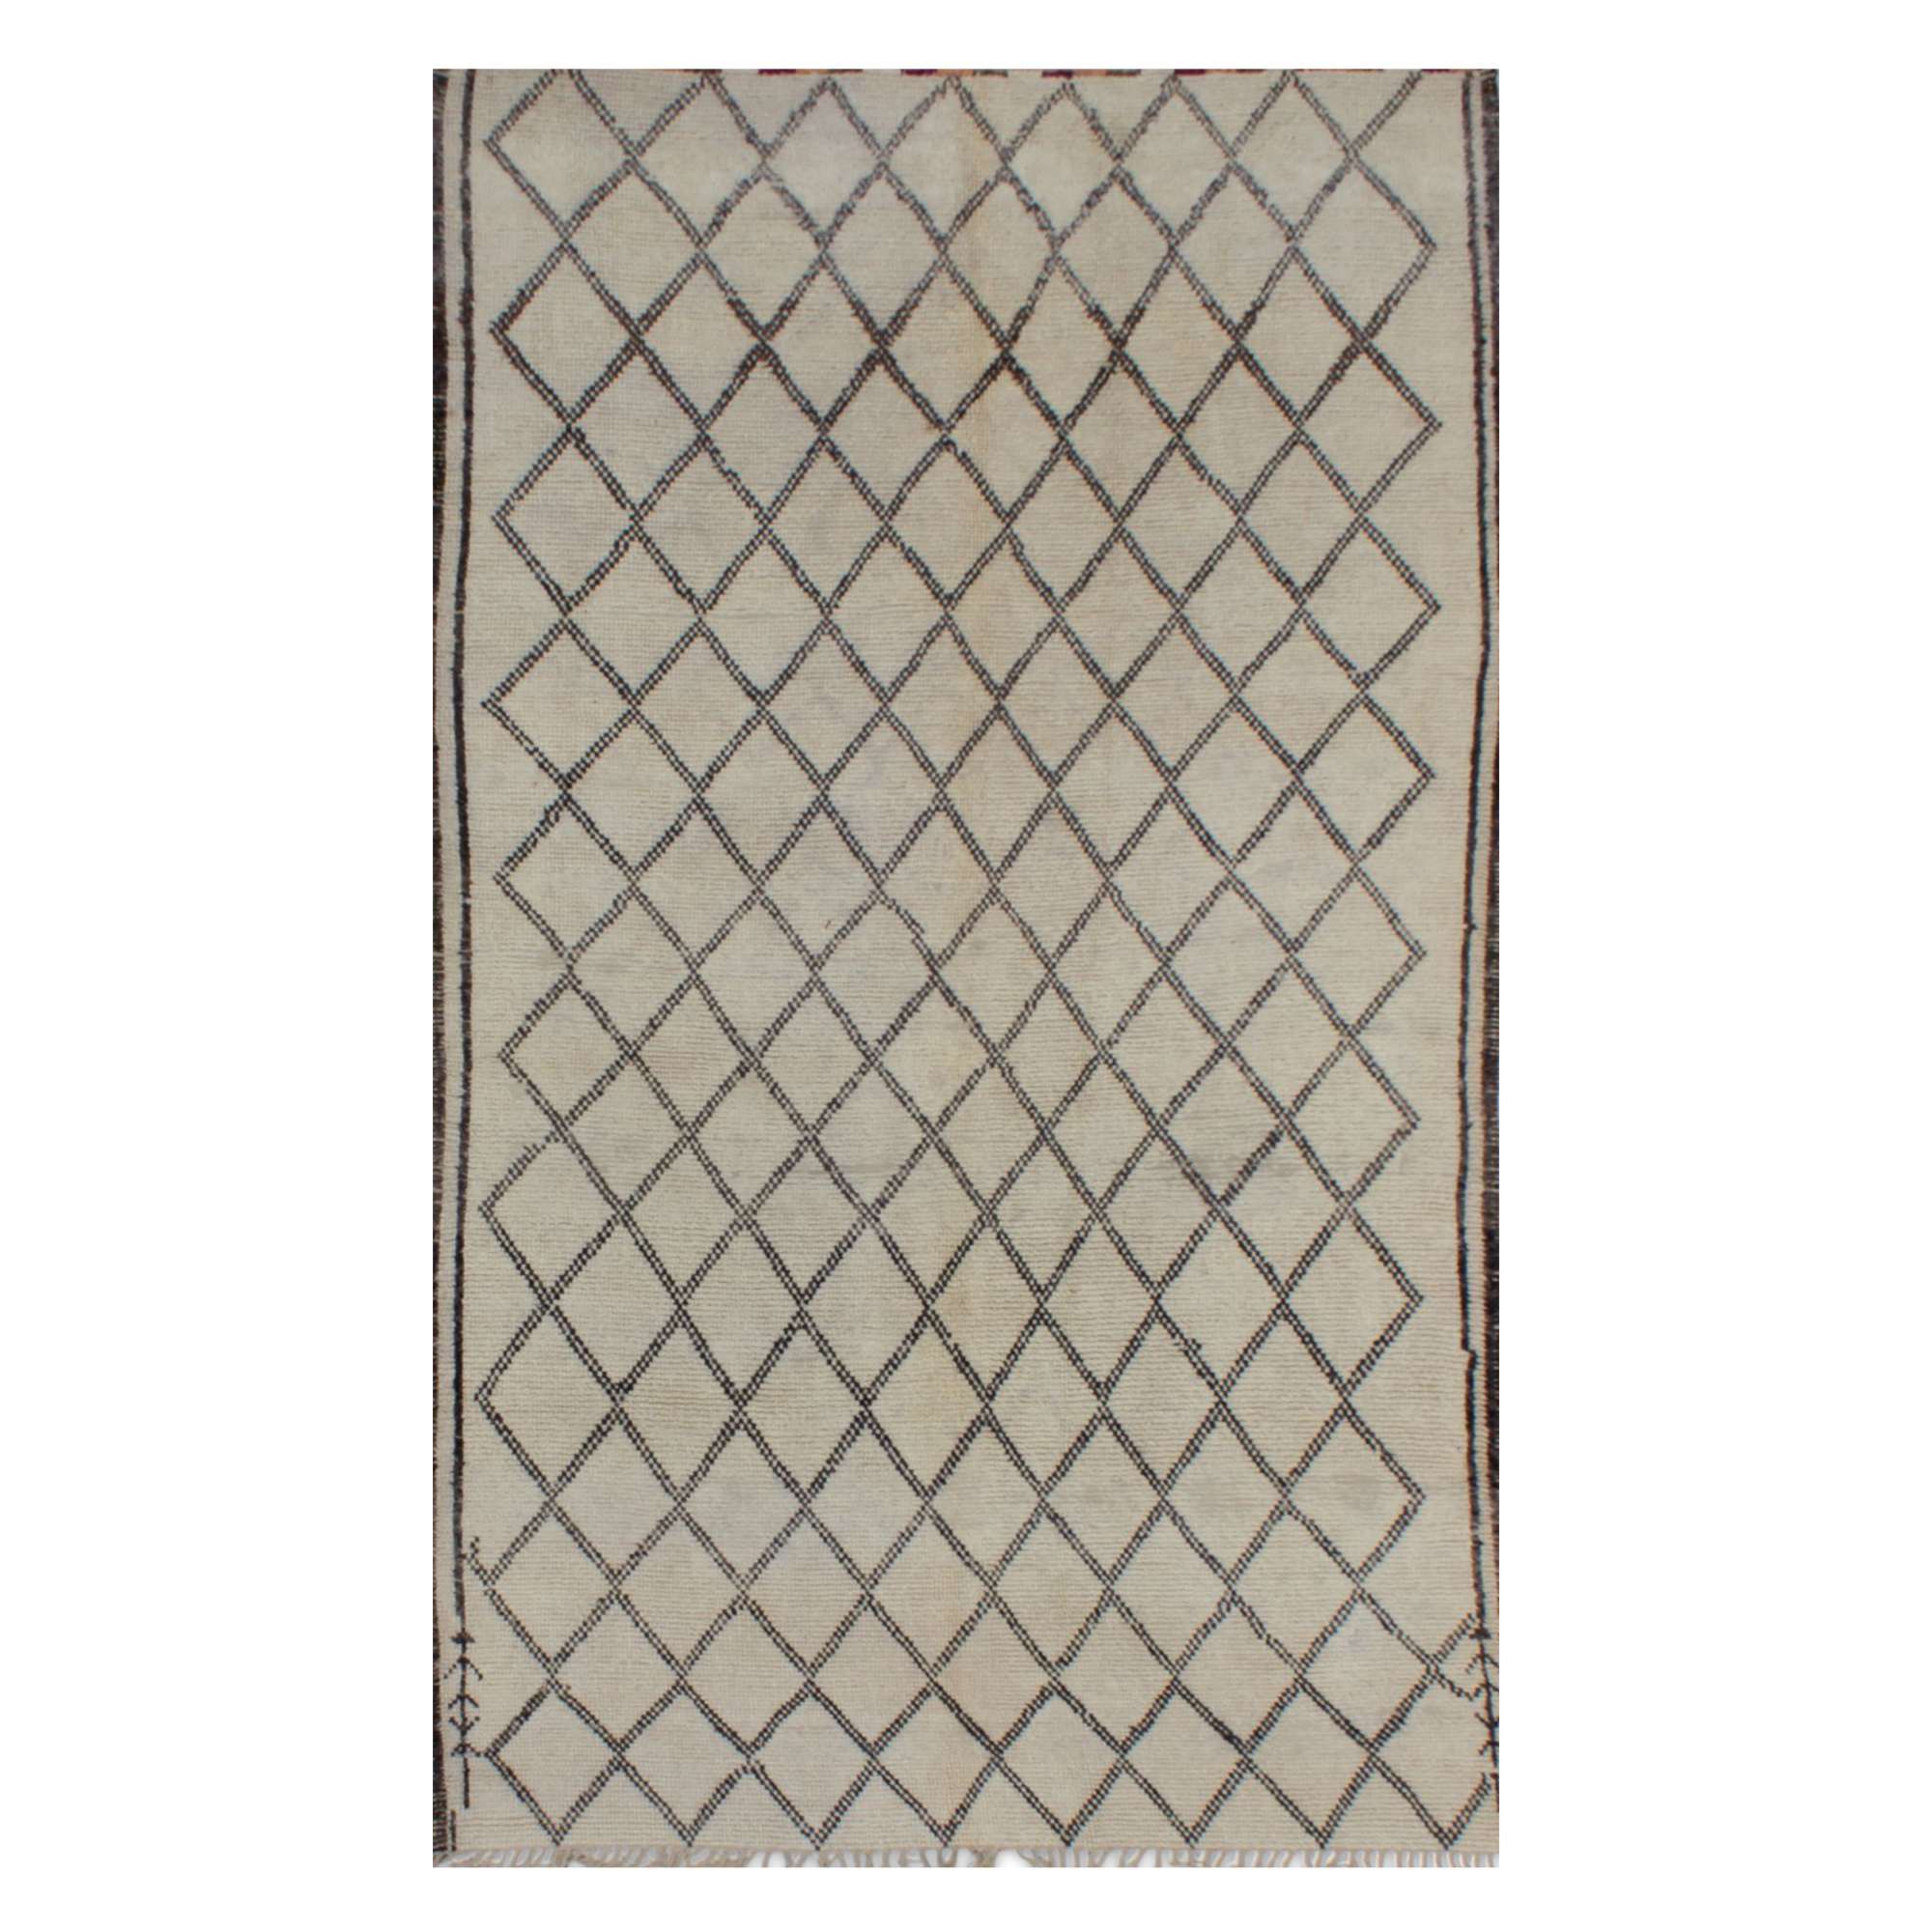 Primarily dating back to the 1950's and 1960's, each rug in the Vintage Moroccan Collection reflects the story of its maker, though deceptively simple in design.